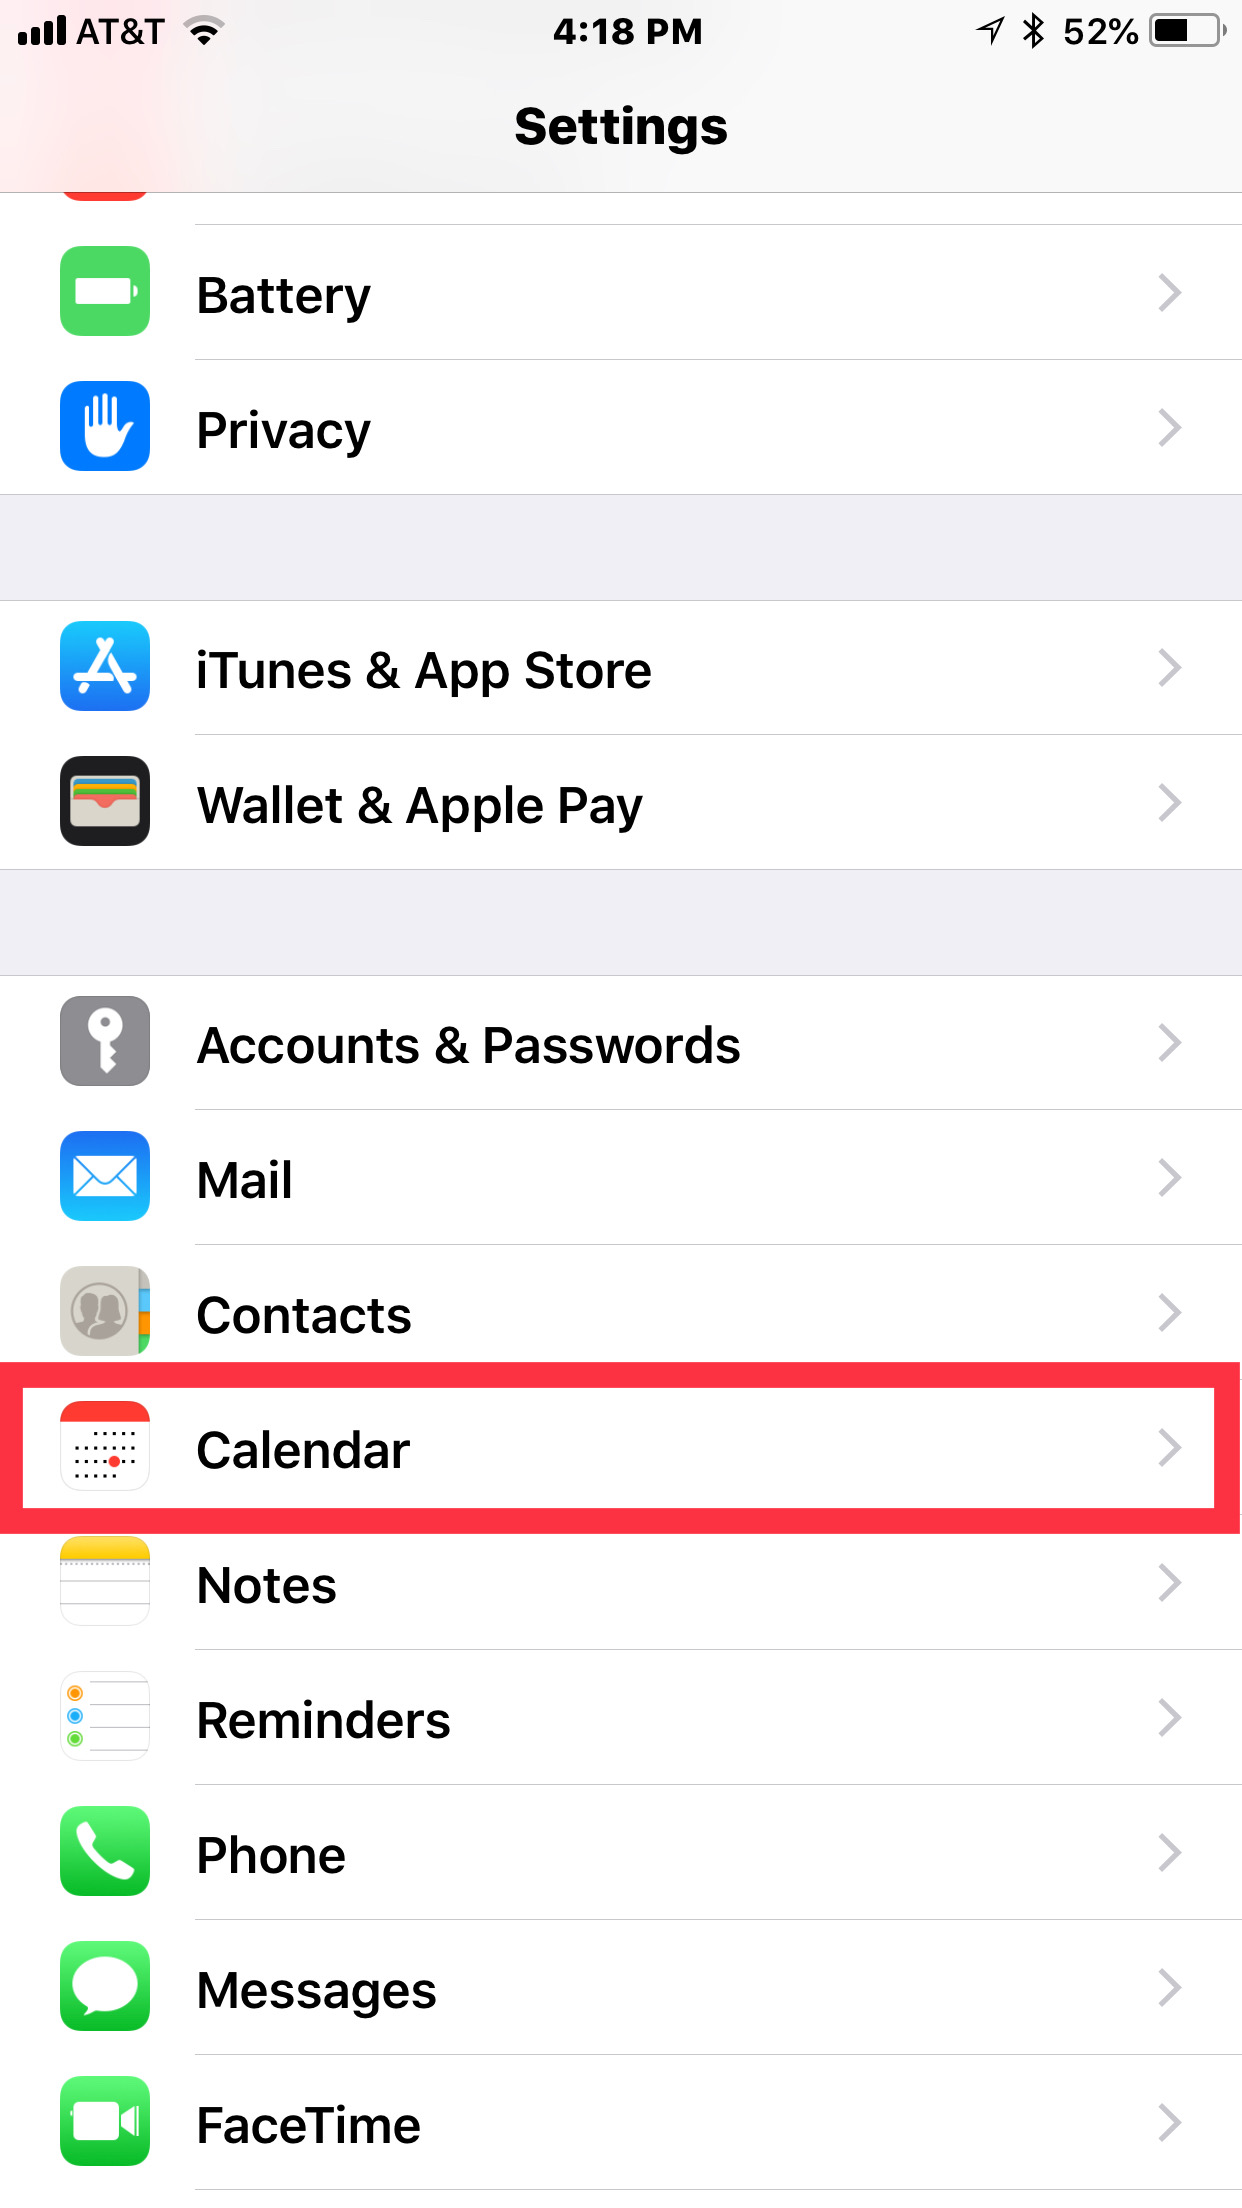 In the settings app, the calendar button is highlighted.